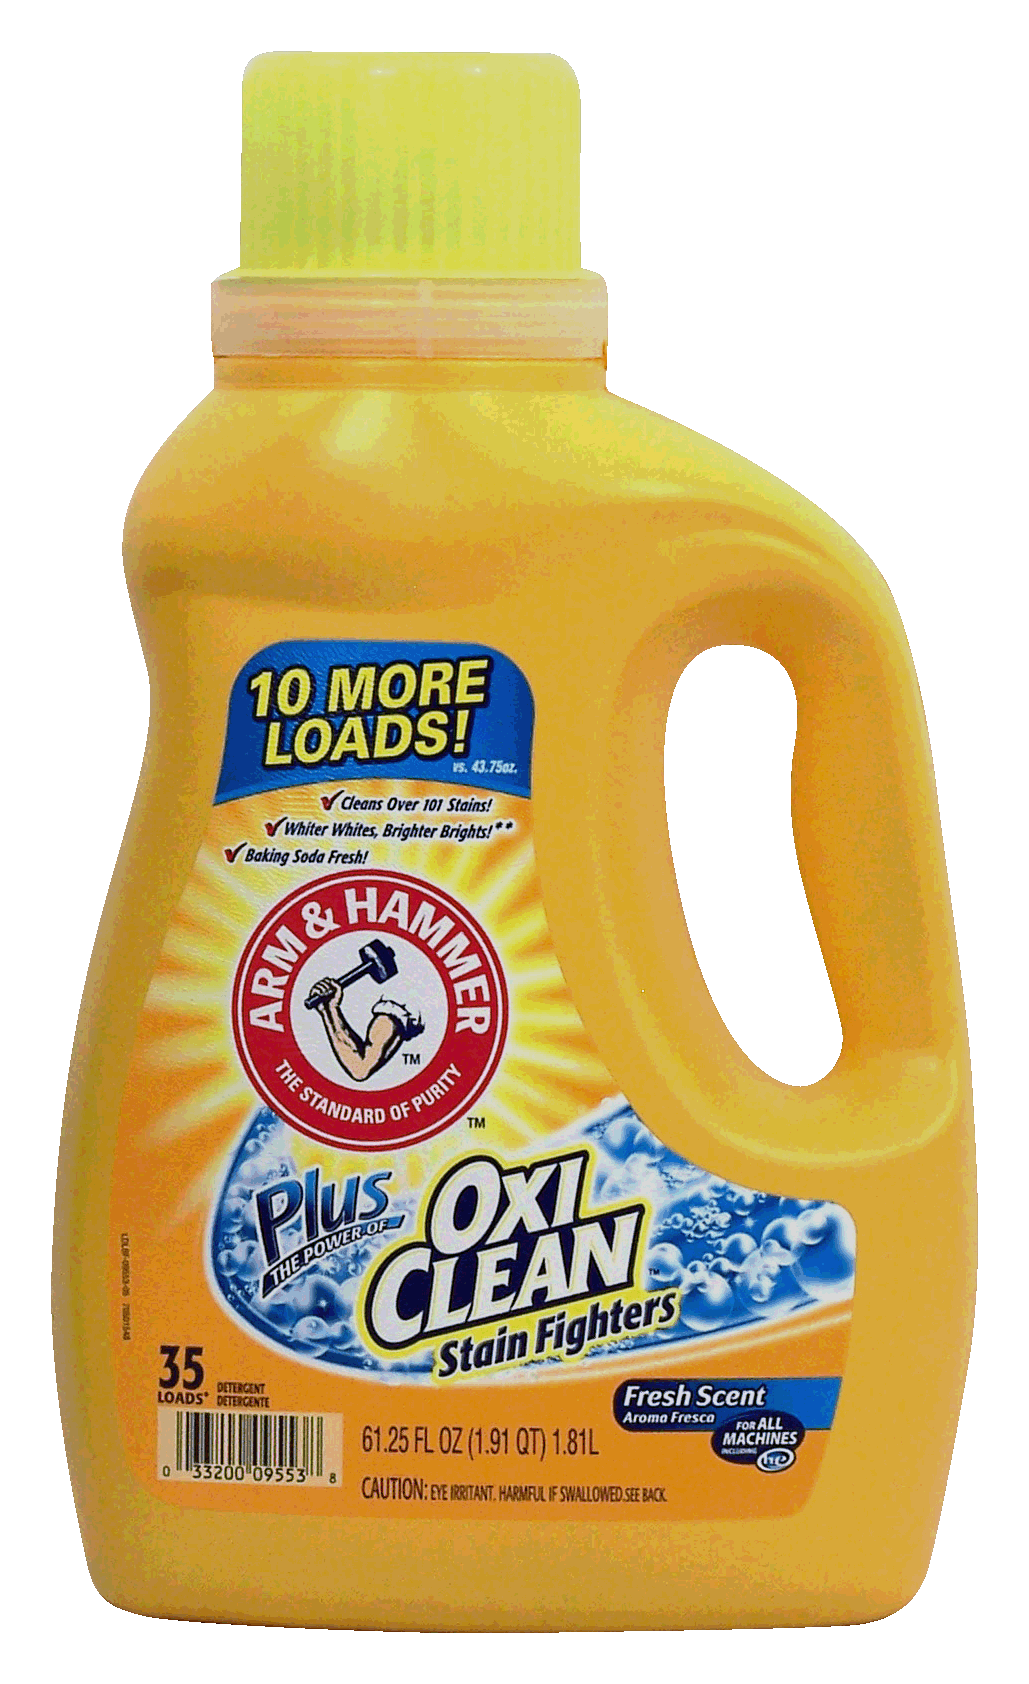 Arm & Hammer  liquid detergent with oxi clean stain fighters, for all machines including h.e., fresh scent Full-Size Picture